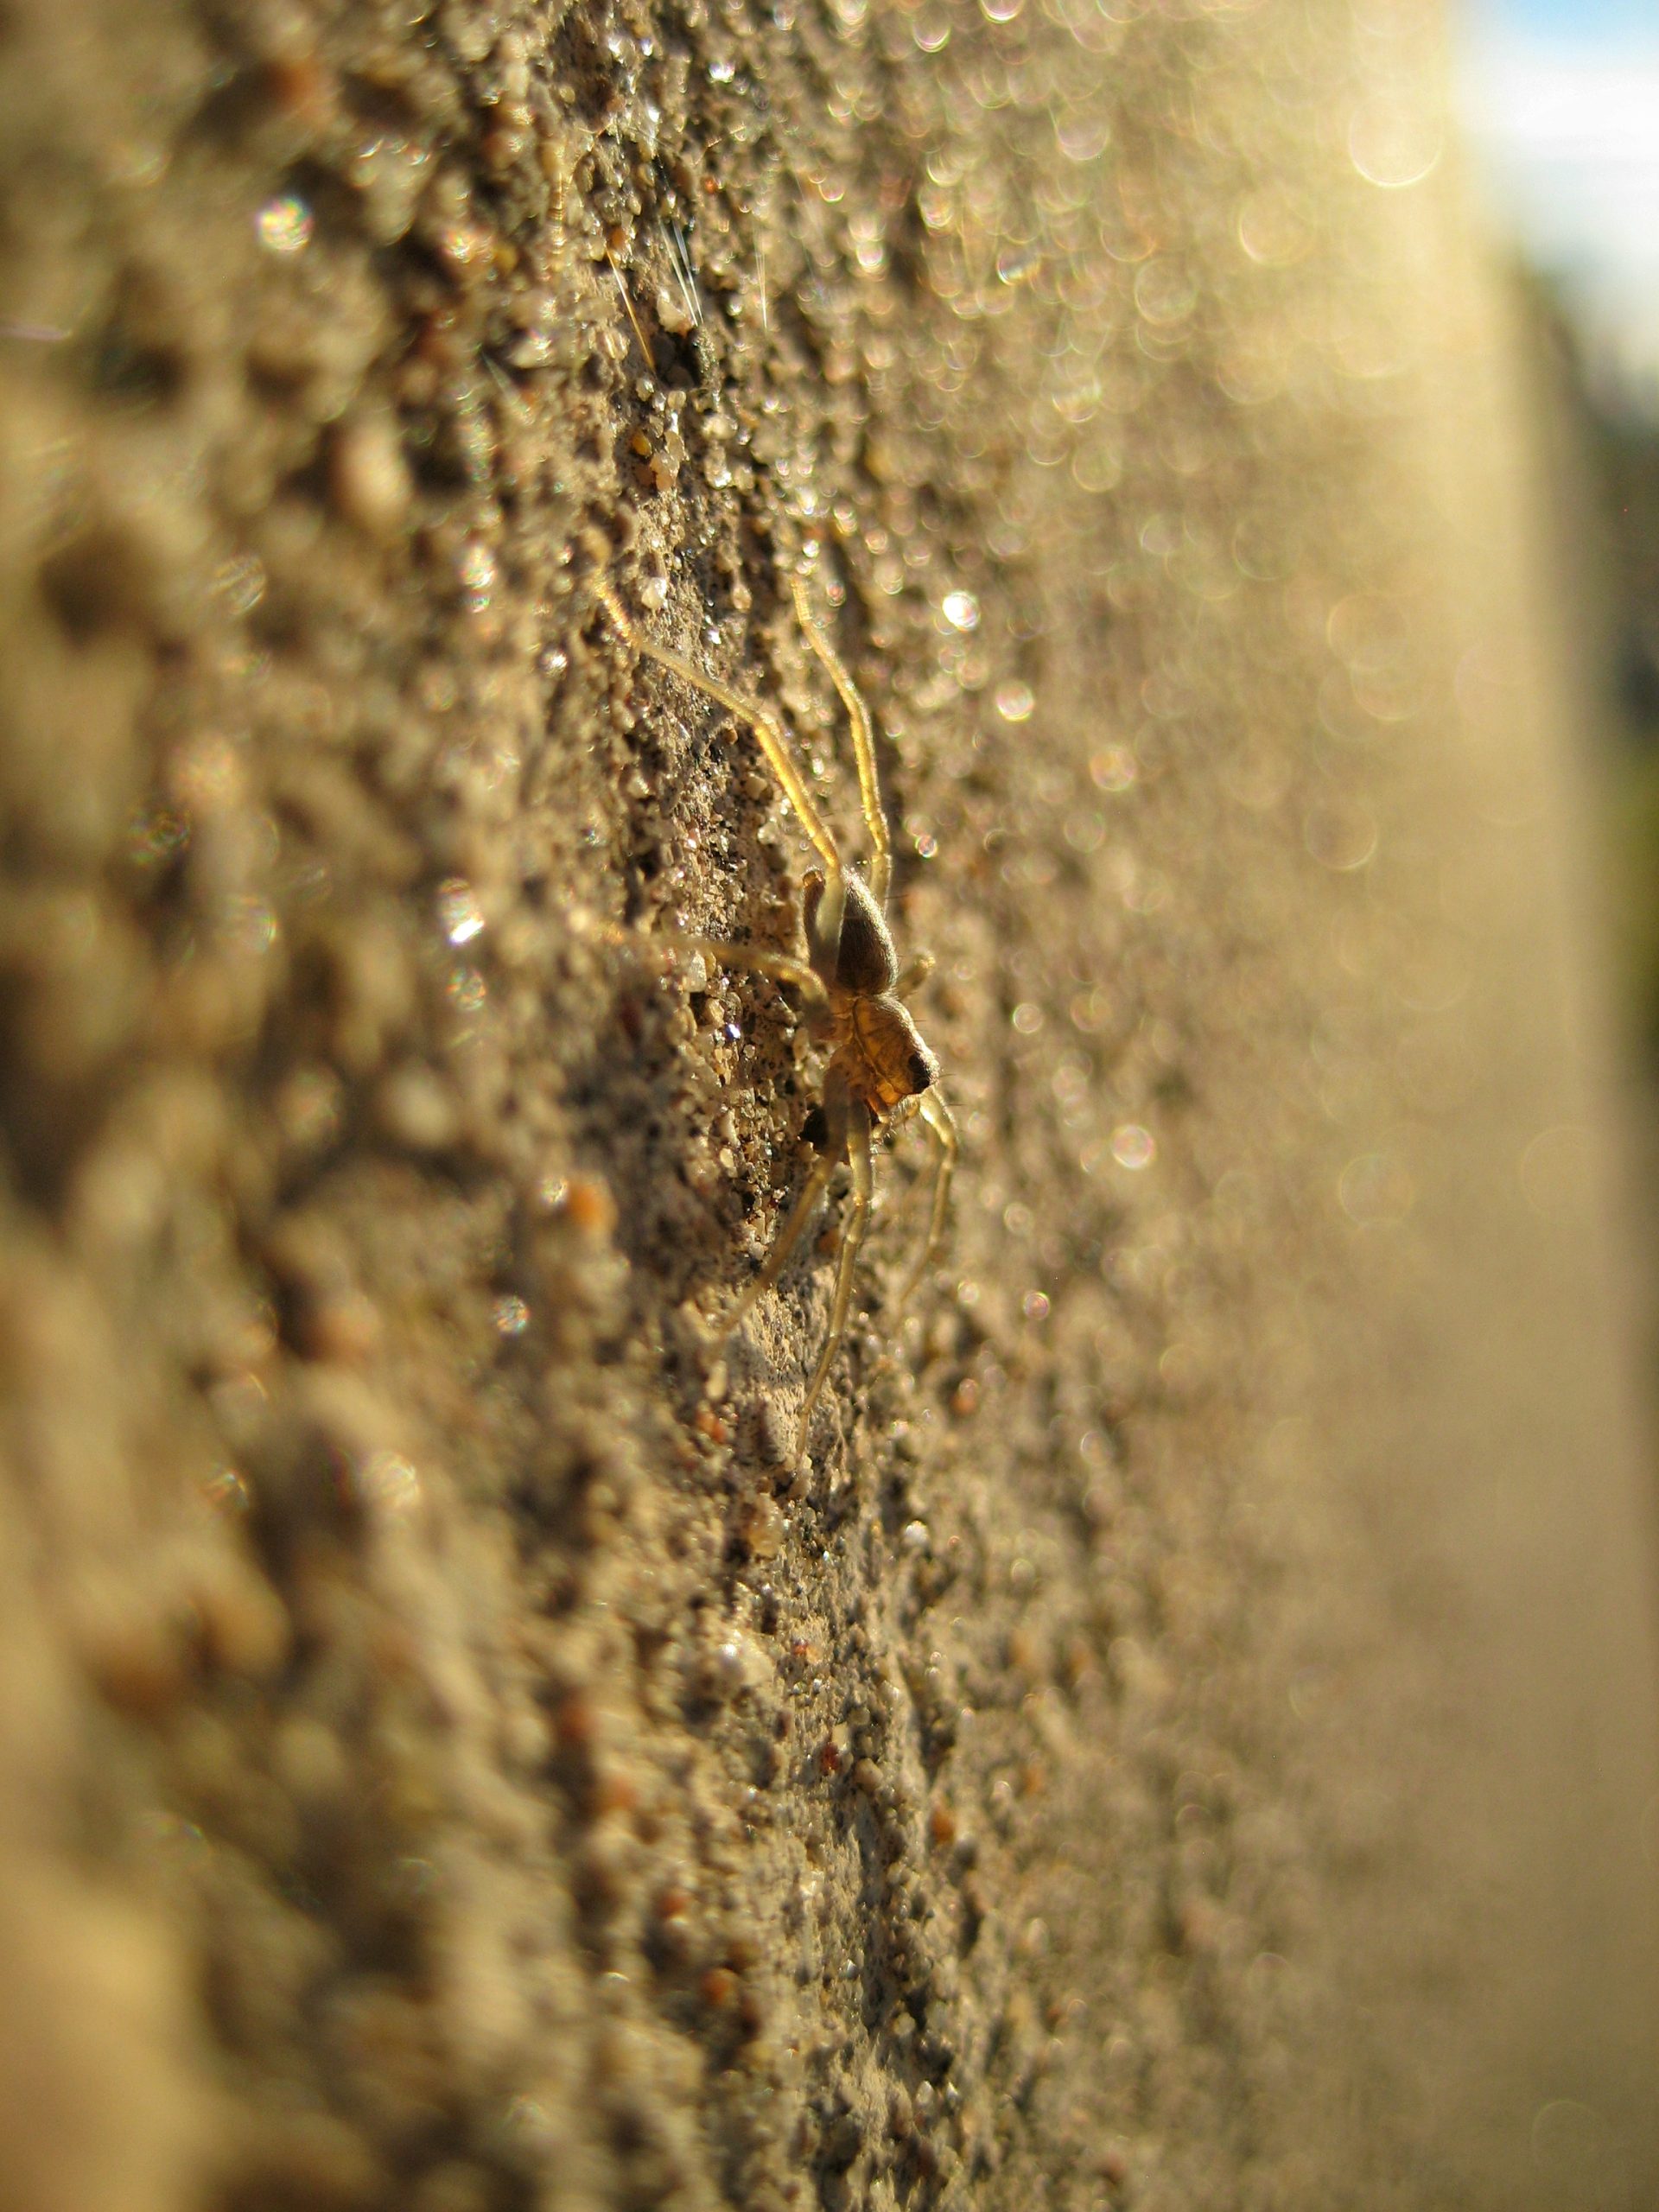 Macro photo of a small wolf spider on the side of a concrete block in the sun